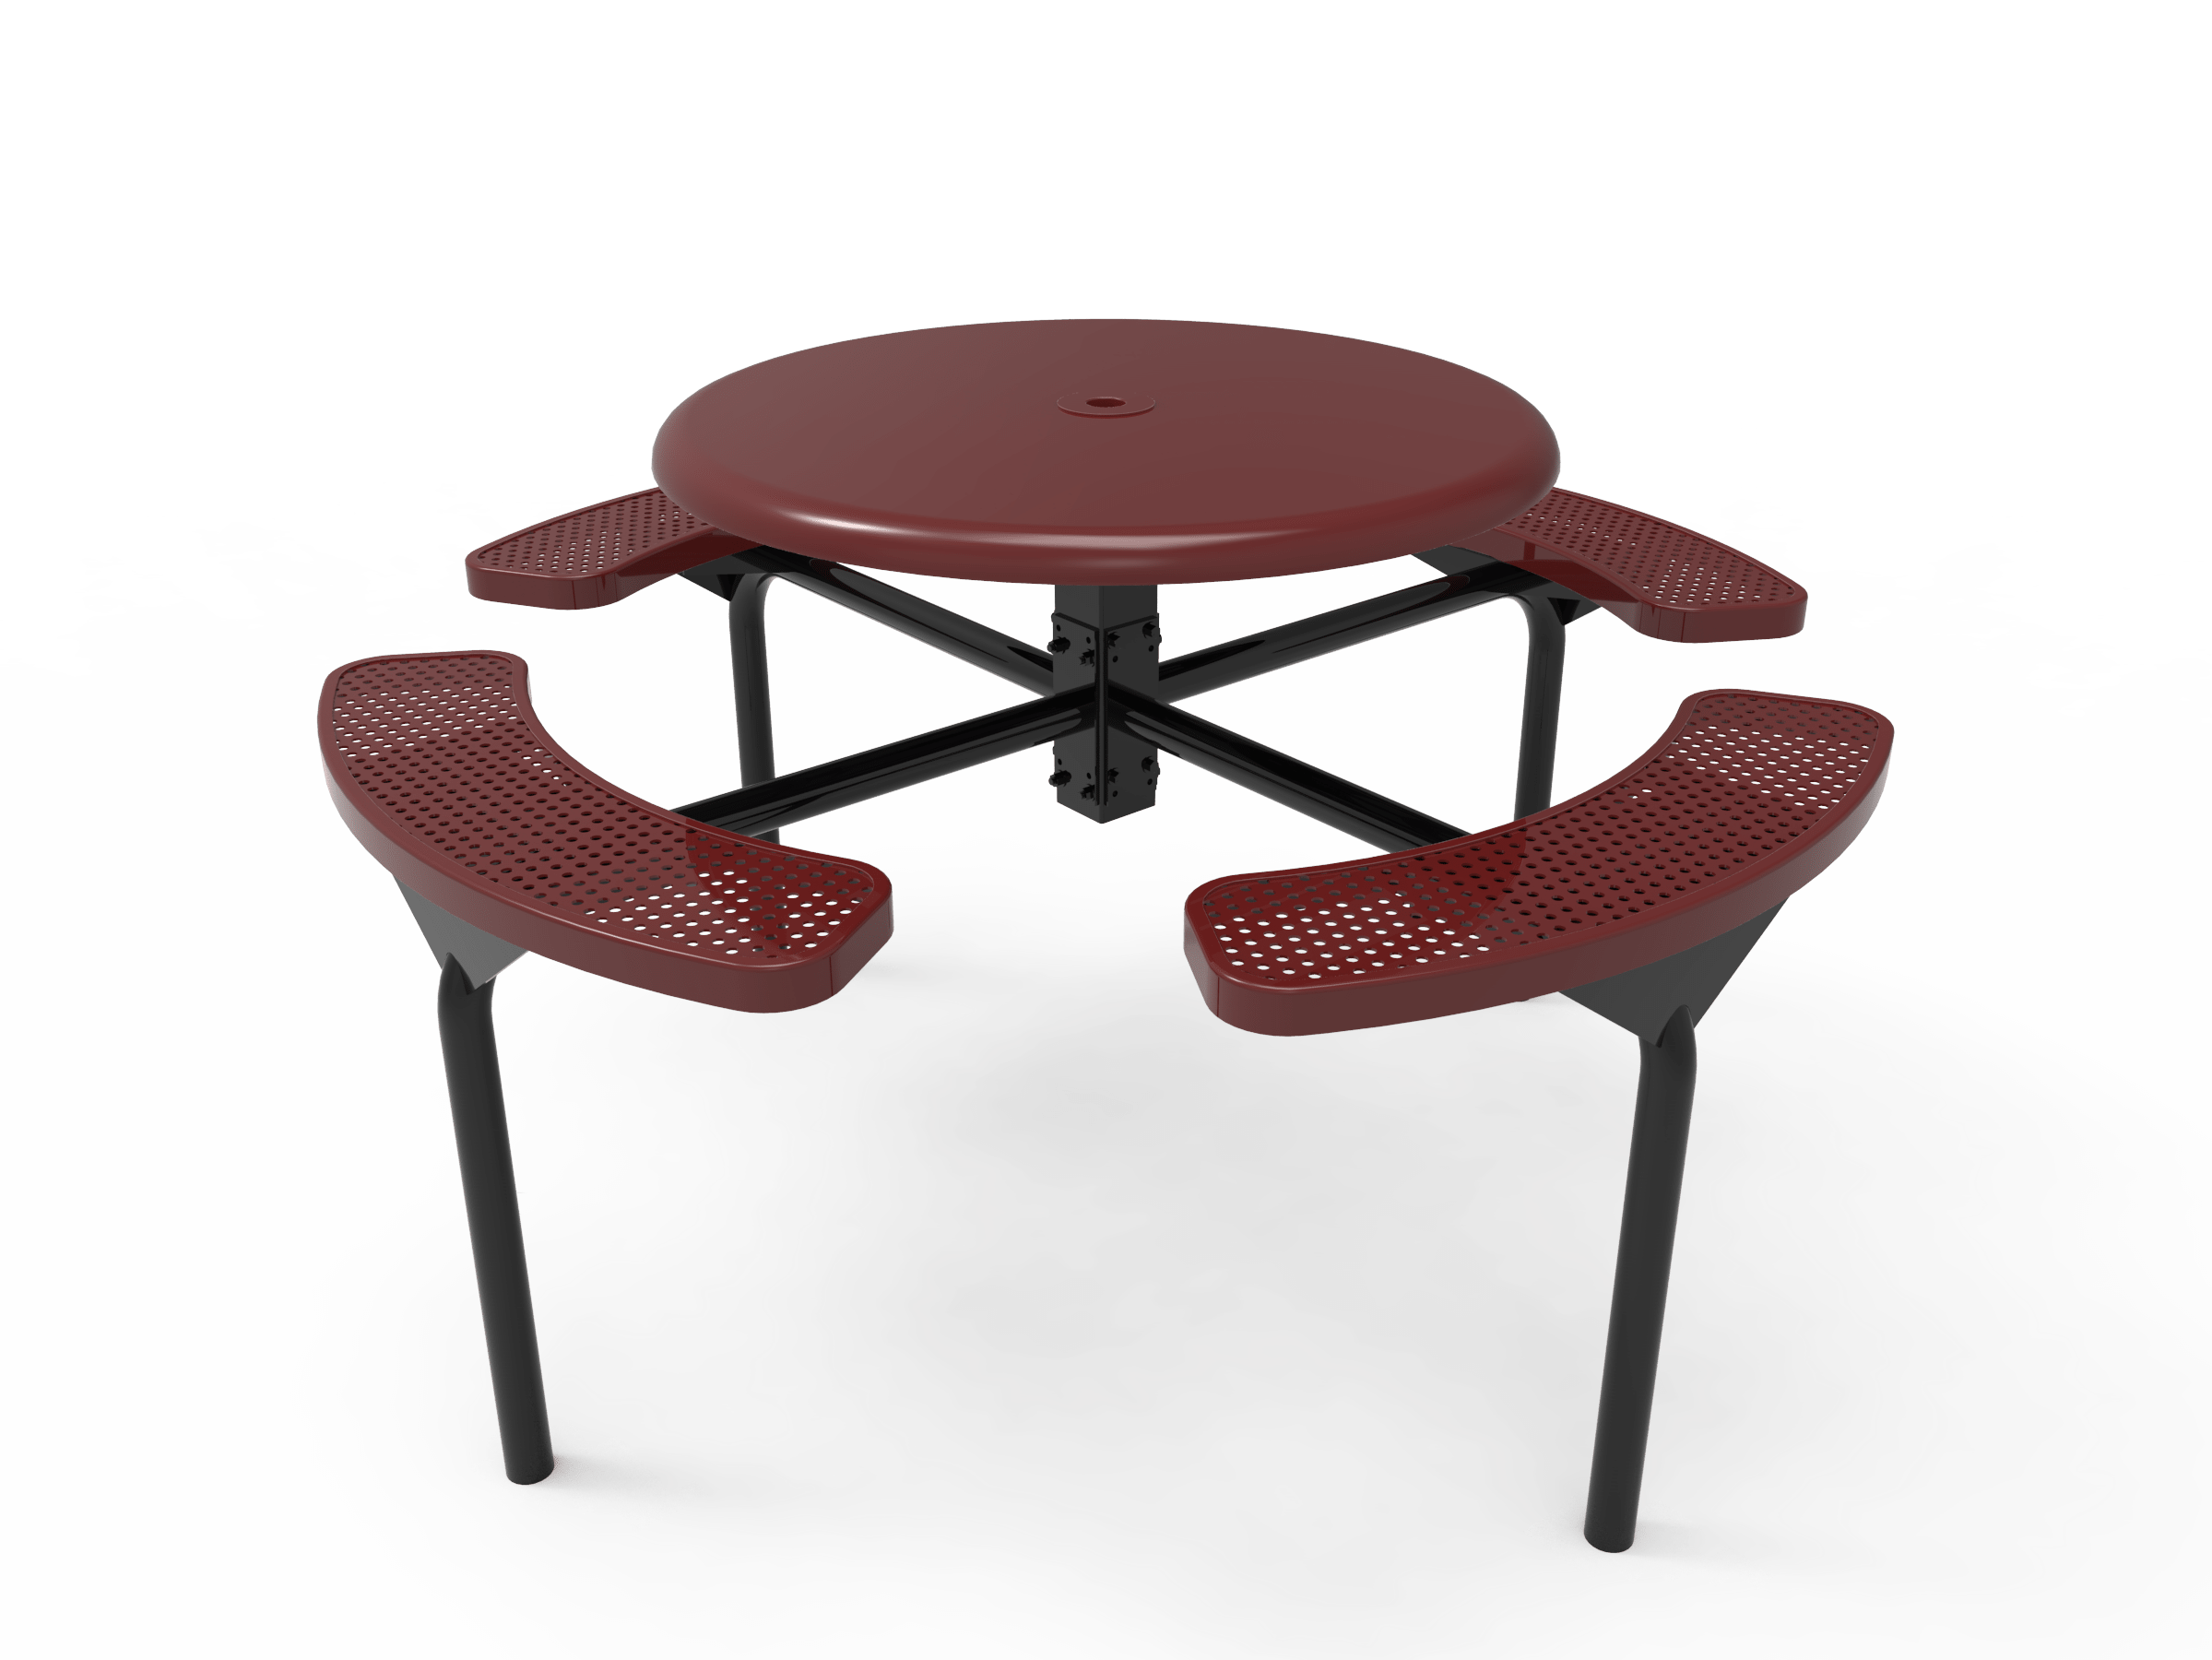 46″ Round Solid Top Nexus In Ground Table With 4 Seats-Punched
TRS46-D-47-000
Industry Standard Finish
$2059.00
TRS46-B-47-000
Advantage Premium Finish
$2579.00
